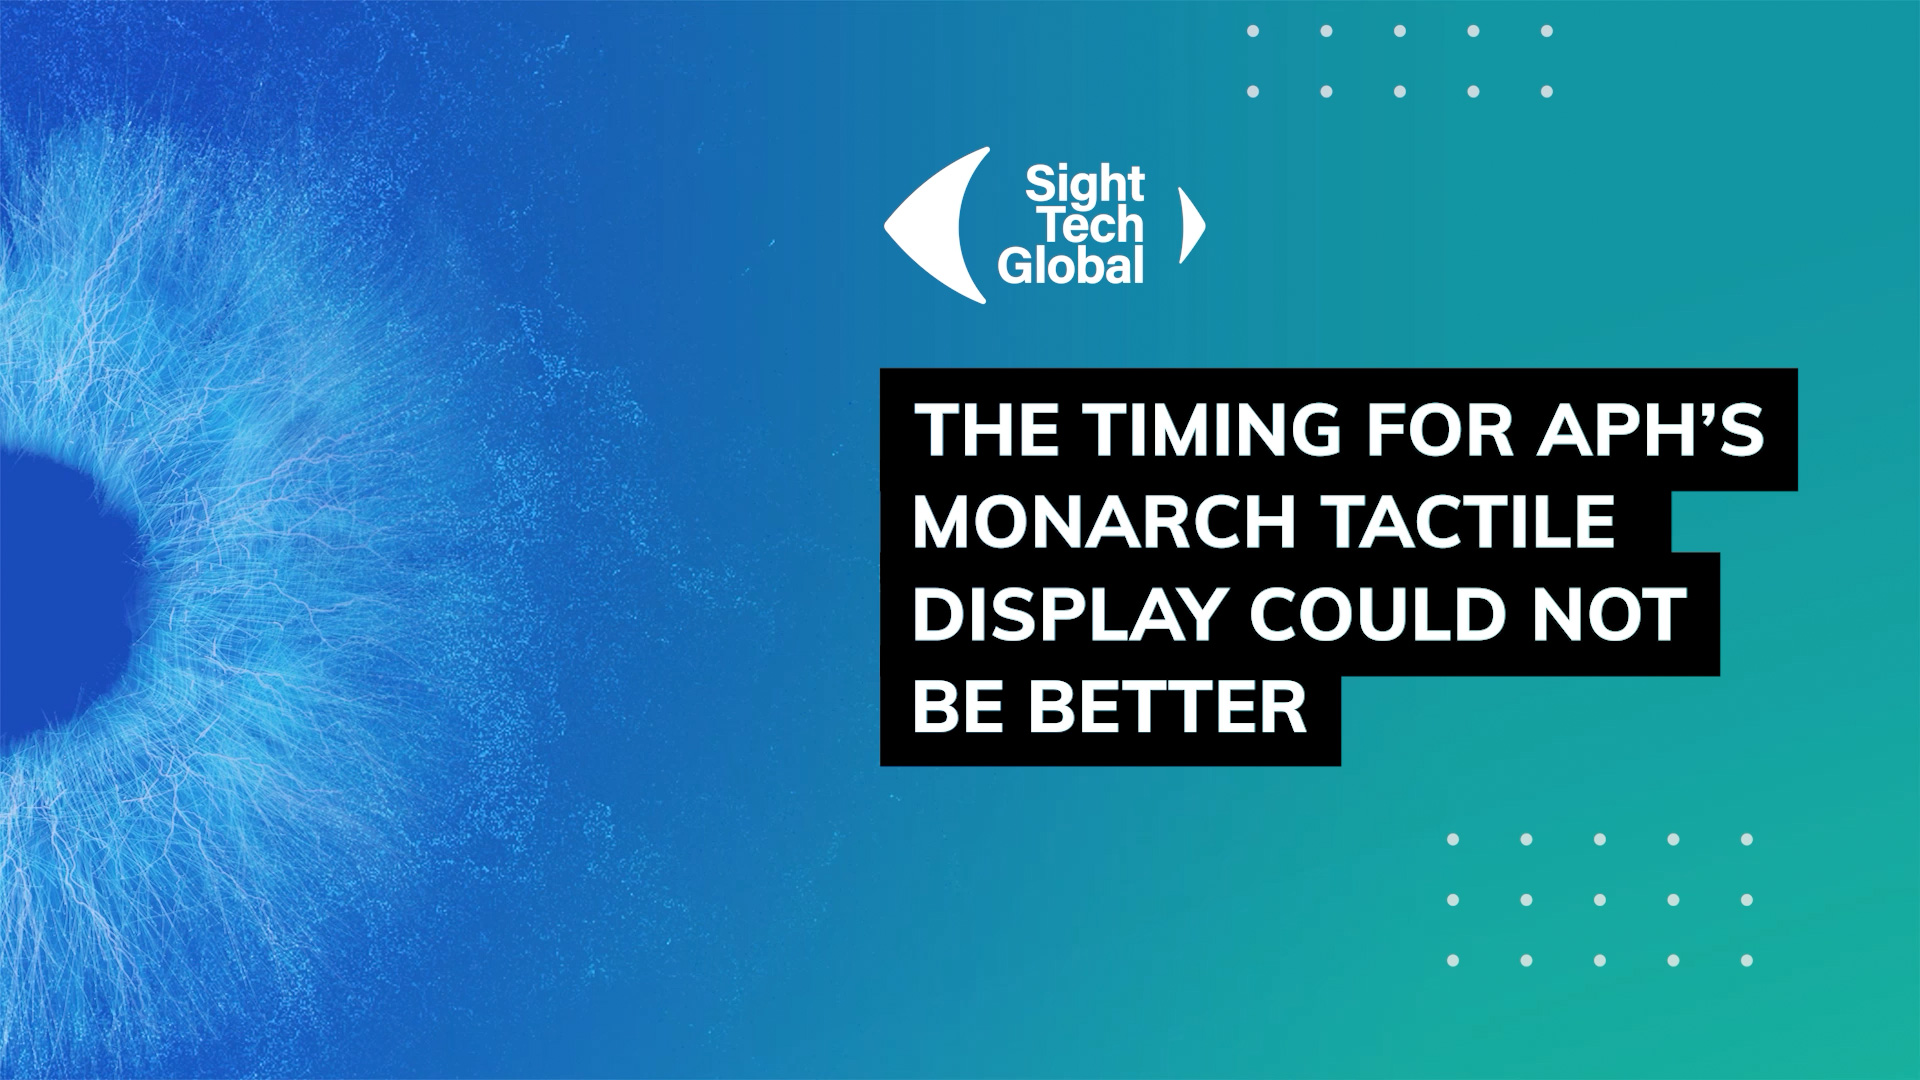 The Timing for APH’s Monarch tactile display could not be better